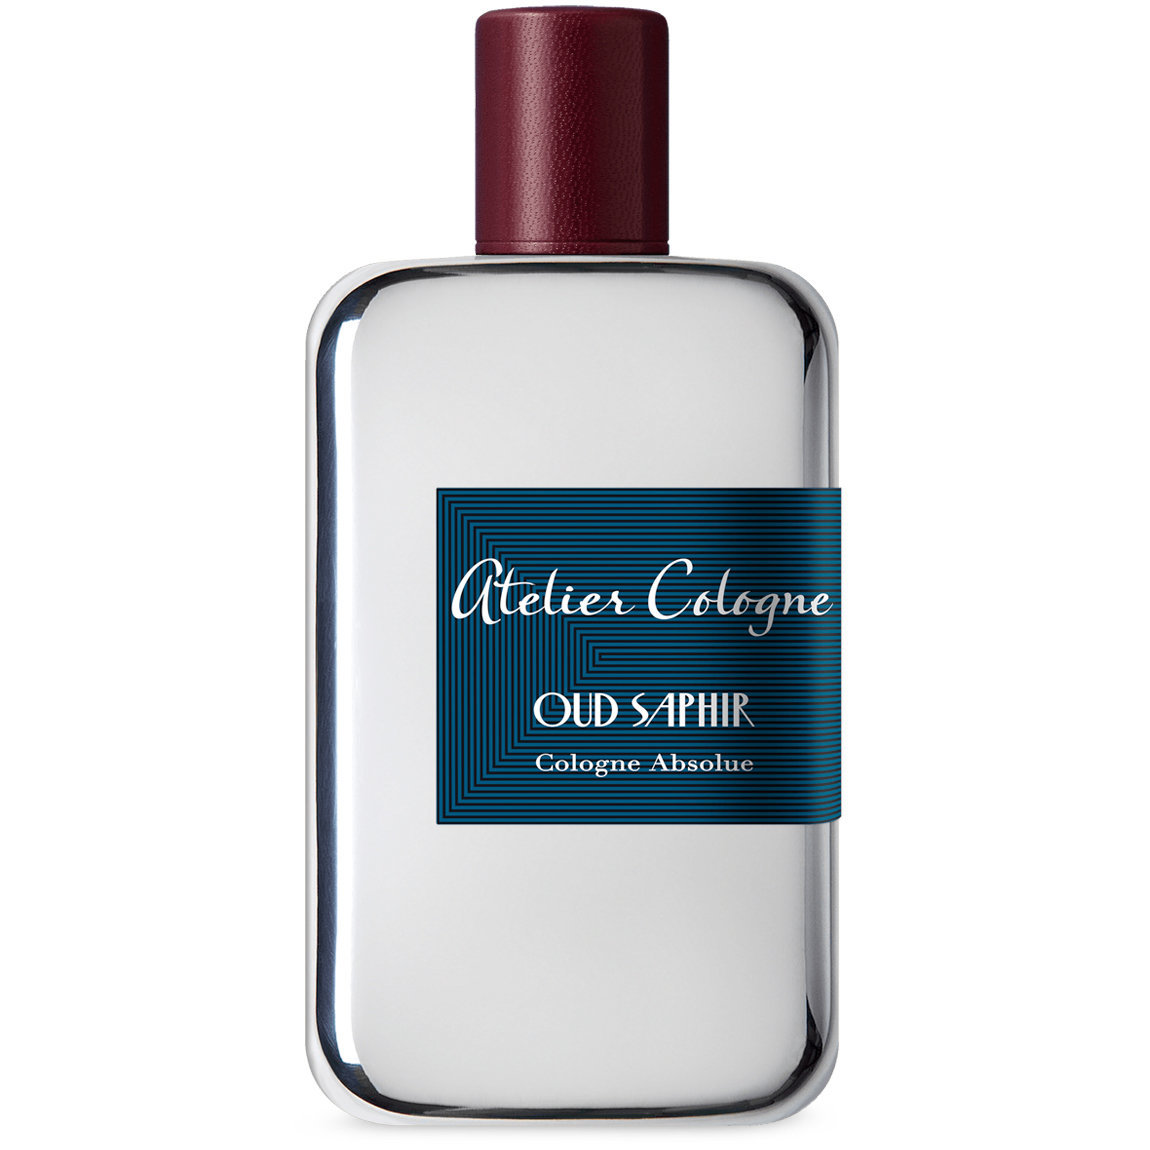 Atelier Cologne Oud Saphir 200 ml alternative view 1 - product swatch.